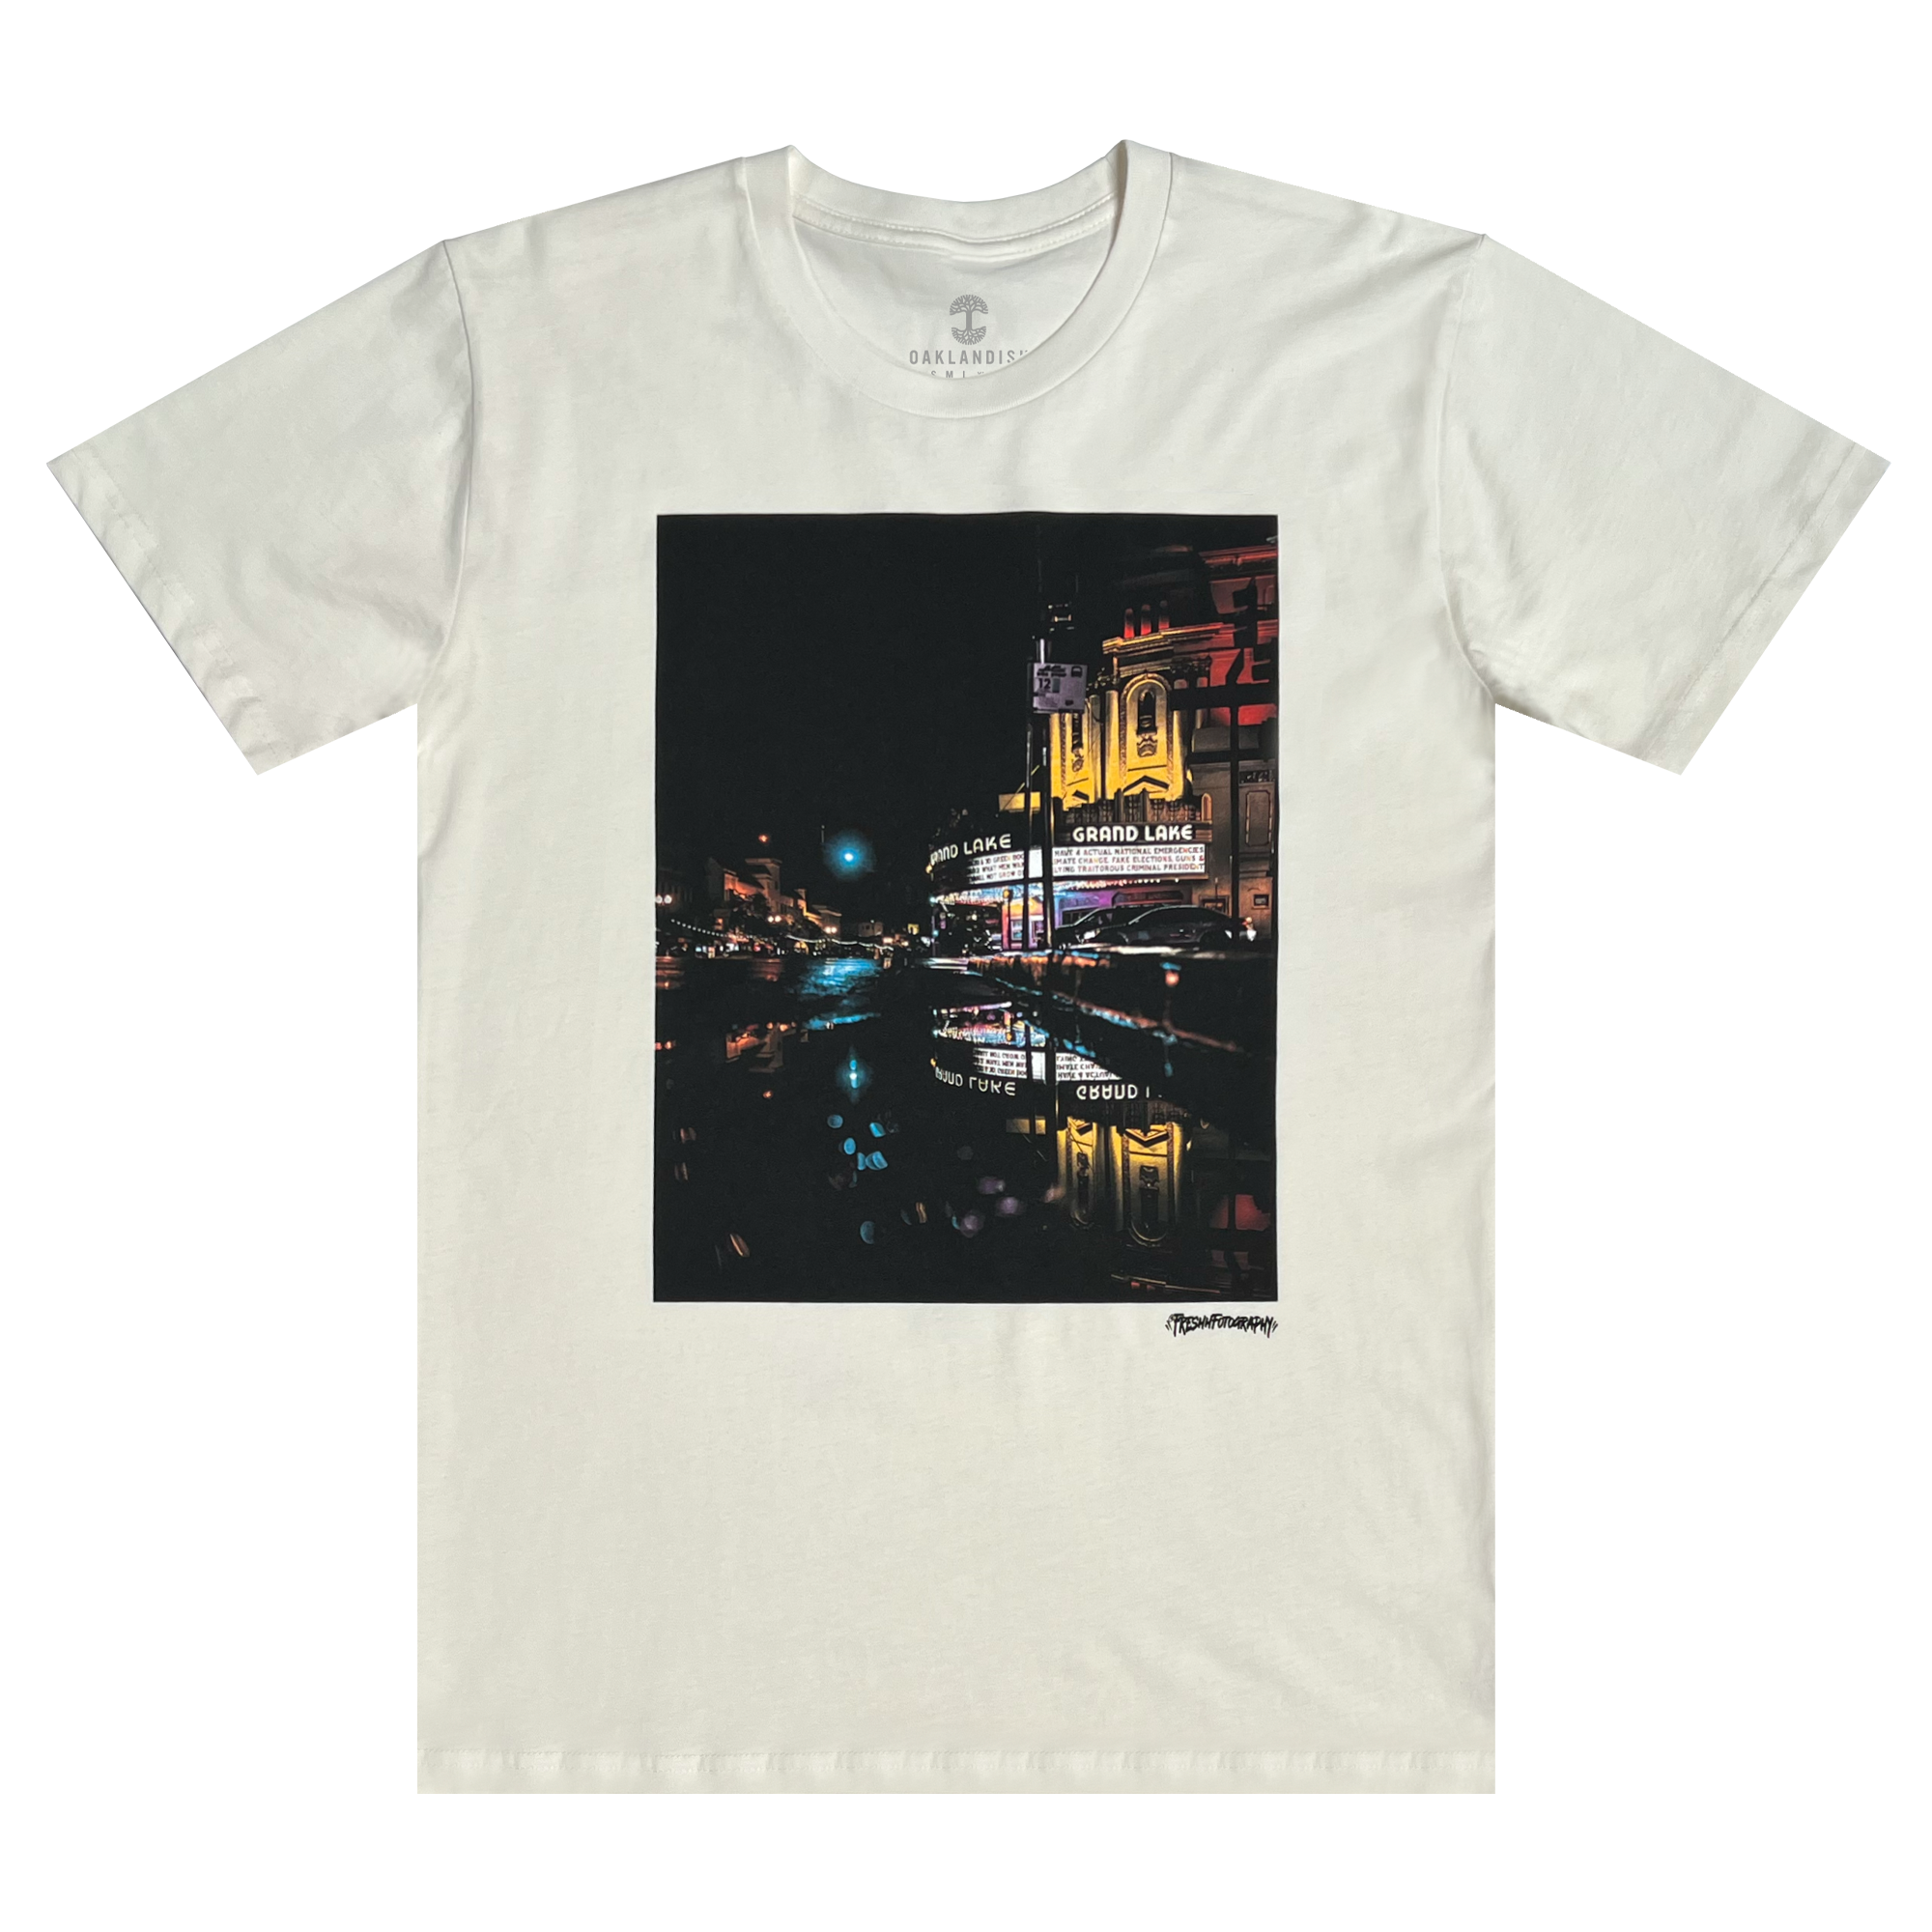 Front view of a natural cotton t-shirt with an image of a rainy night reflecting street lights and The Grand Laker Theatre in Oakland.